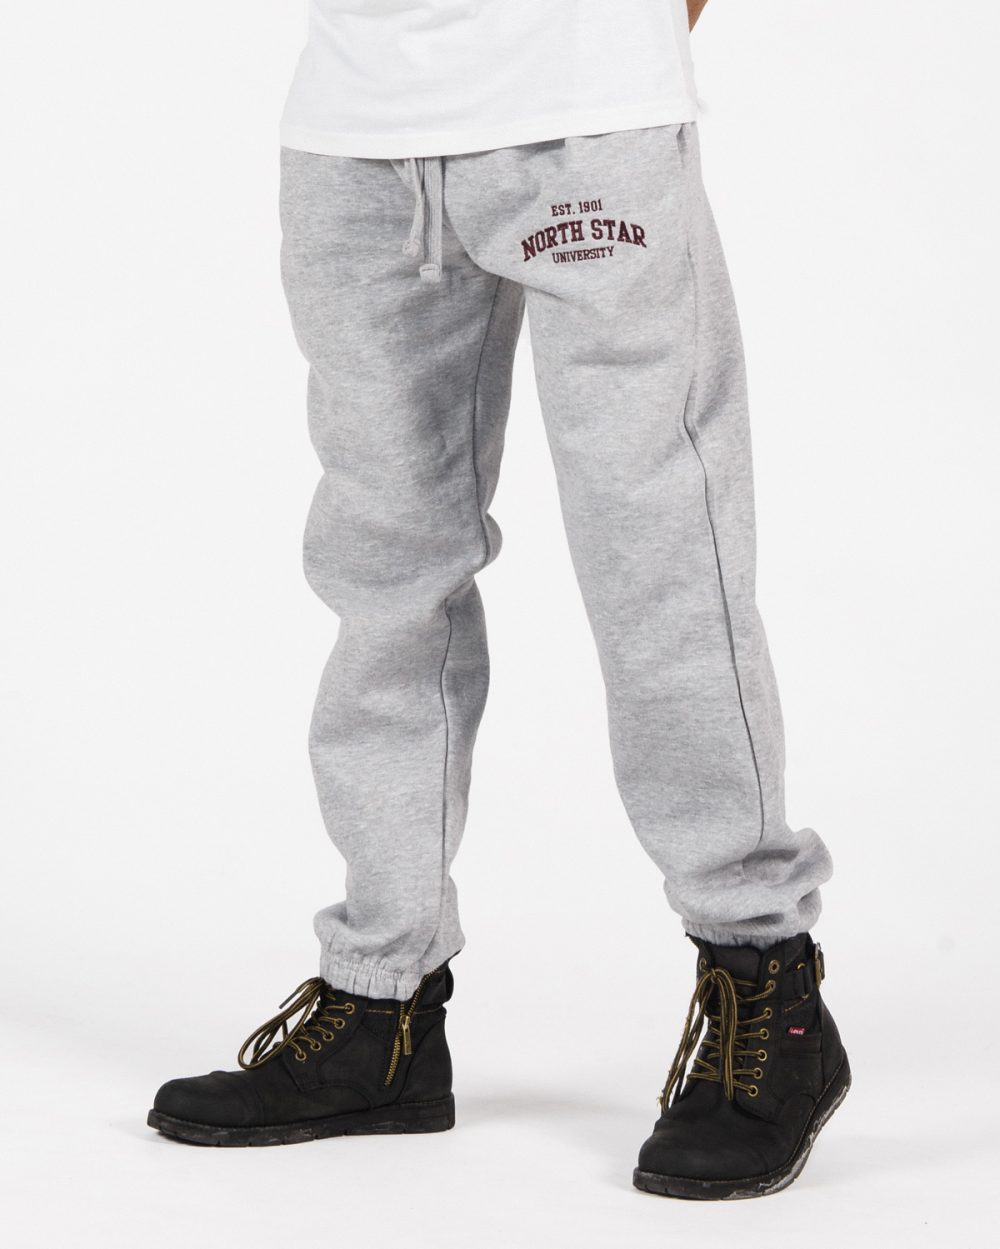 Premium Sweatpants 203 unisex fit in grey with burgundy embroidery on male model.